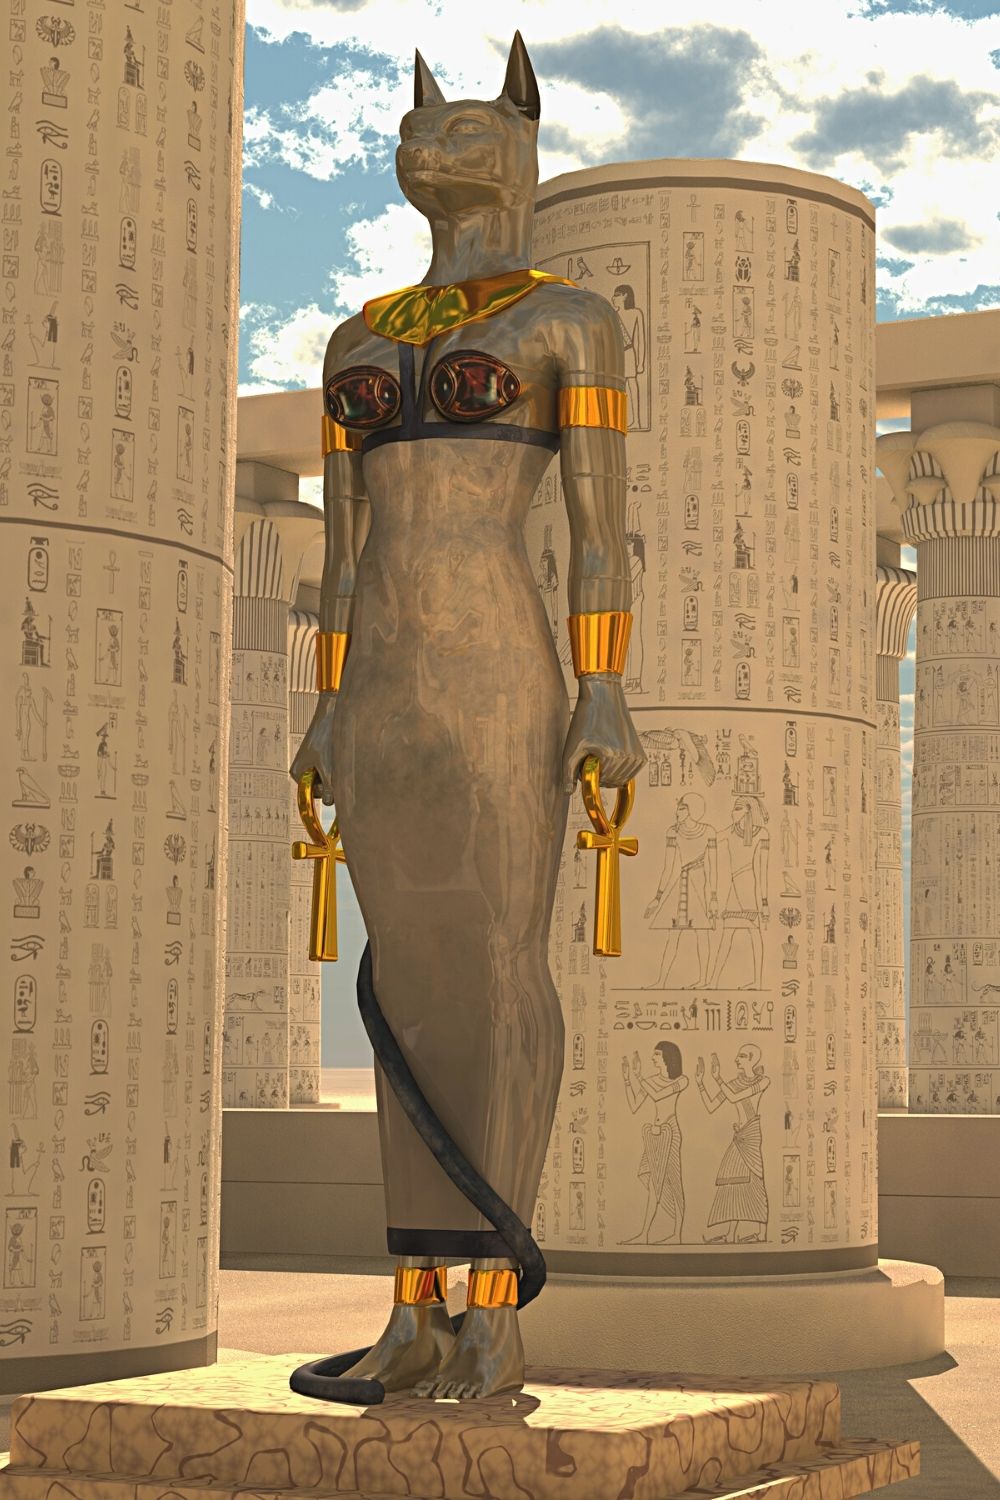 Ancient Egyptians' belief in cats having supernatural powers stems from a goddess who can shapeshift from human to cat